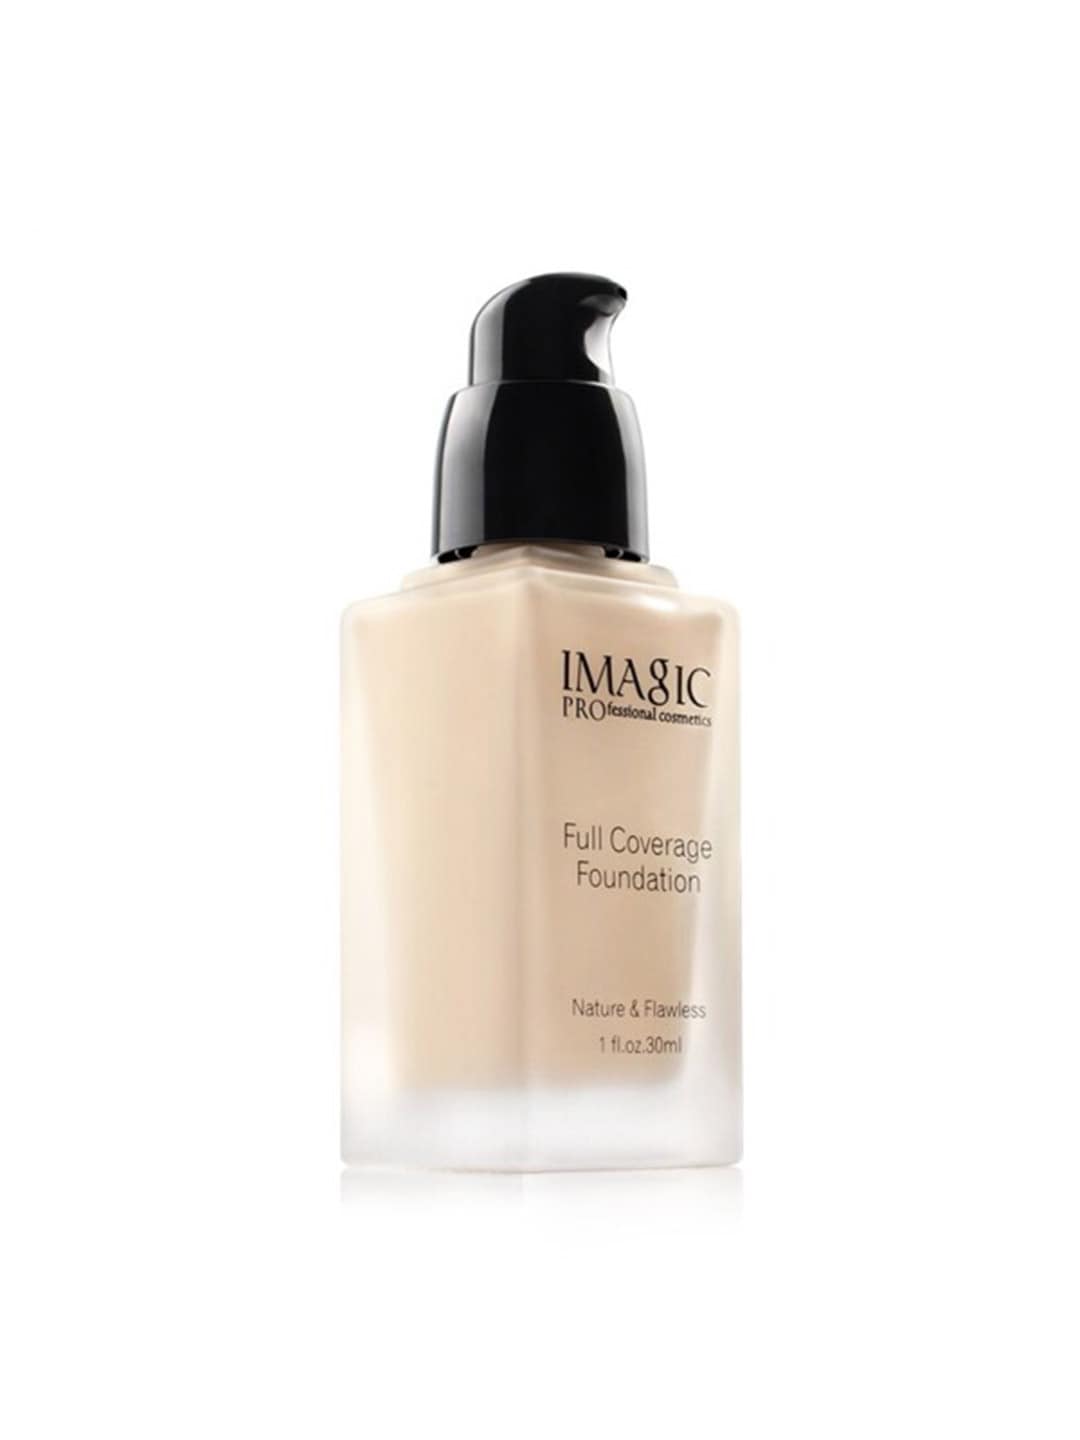 IMAGIC Professional Cosmetics Full Coverage Foundation 30 ml - Slightly Pink 1212 Price in India